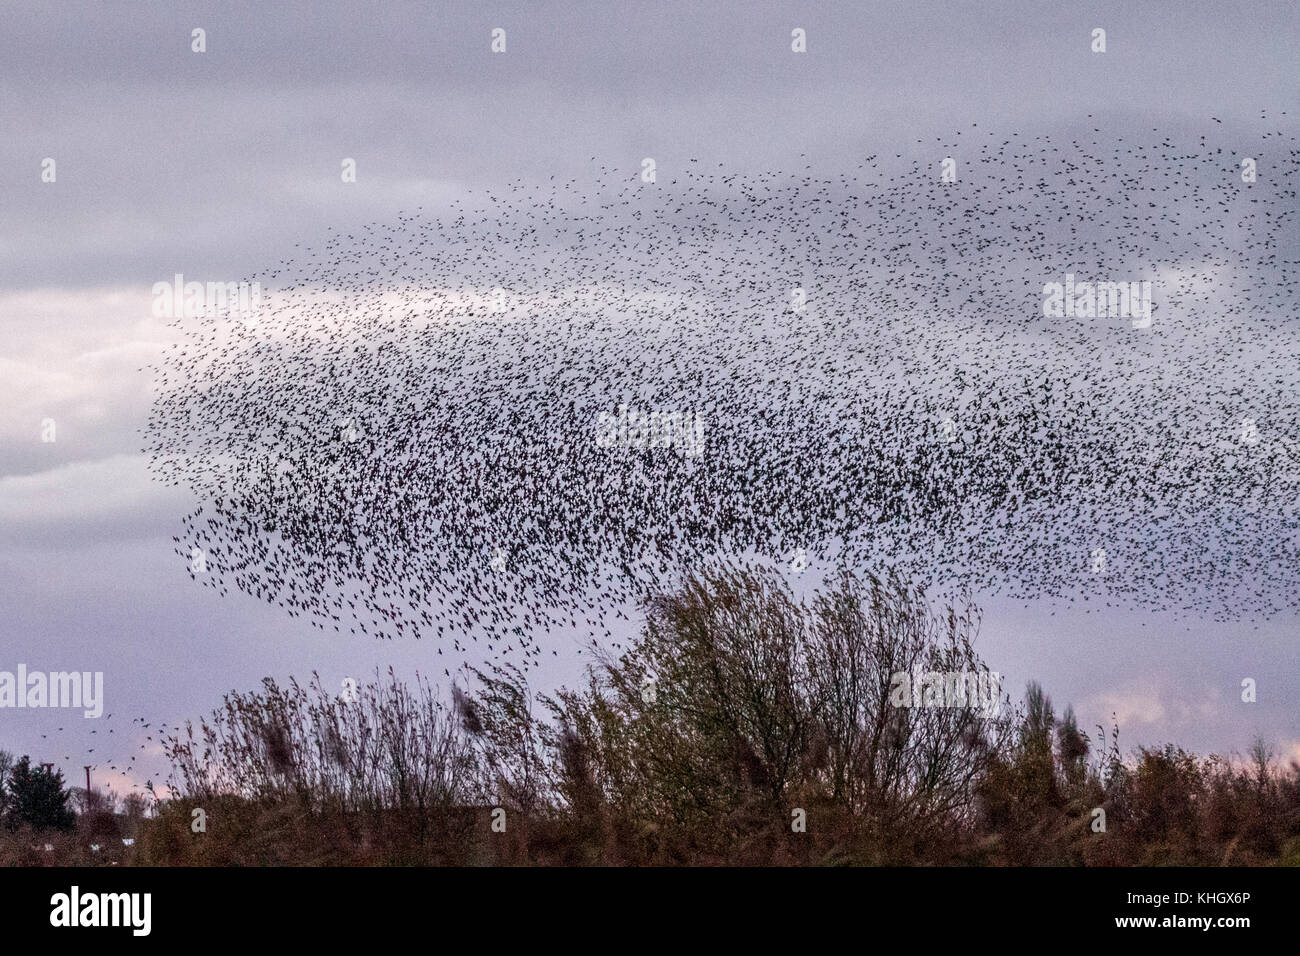 Burscough, Lancashire, UK Weather 18th November, 2017. Spectacular Starling flocks mumurate over Martin Mere nature reserve at sunset as an estimated fifty thousand starlings gather at the onset of a cold winter, and early nights triggers this autumn gathering and groupings. The murmur or chatter, the interaction between the huge numbers as they fly, is quite intense and is thought to form part of a communication of sorts. These huge flocks are the largest seen in the last for 12 years and are attracting large numbers of birdwatchers to the area. Credit. MediaWorldImages/AlamyLiveNews Stock Photo